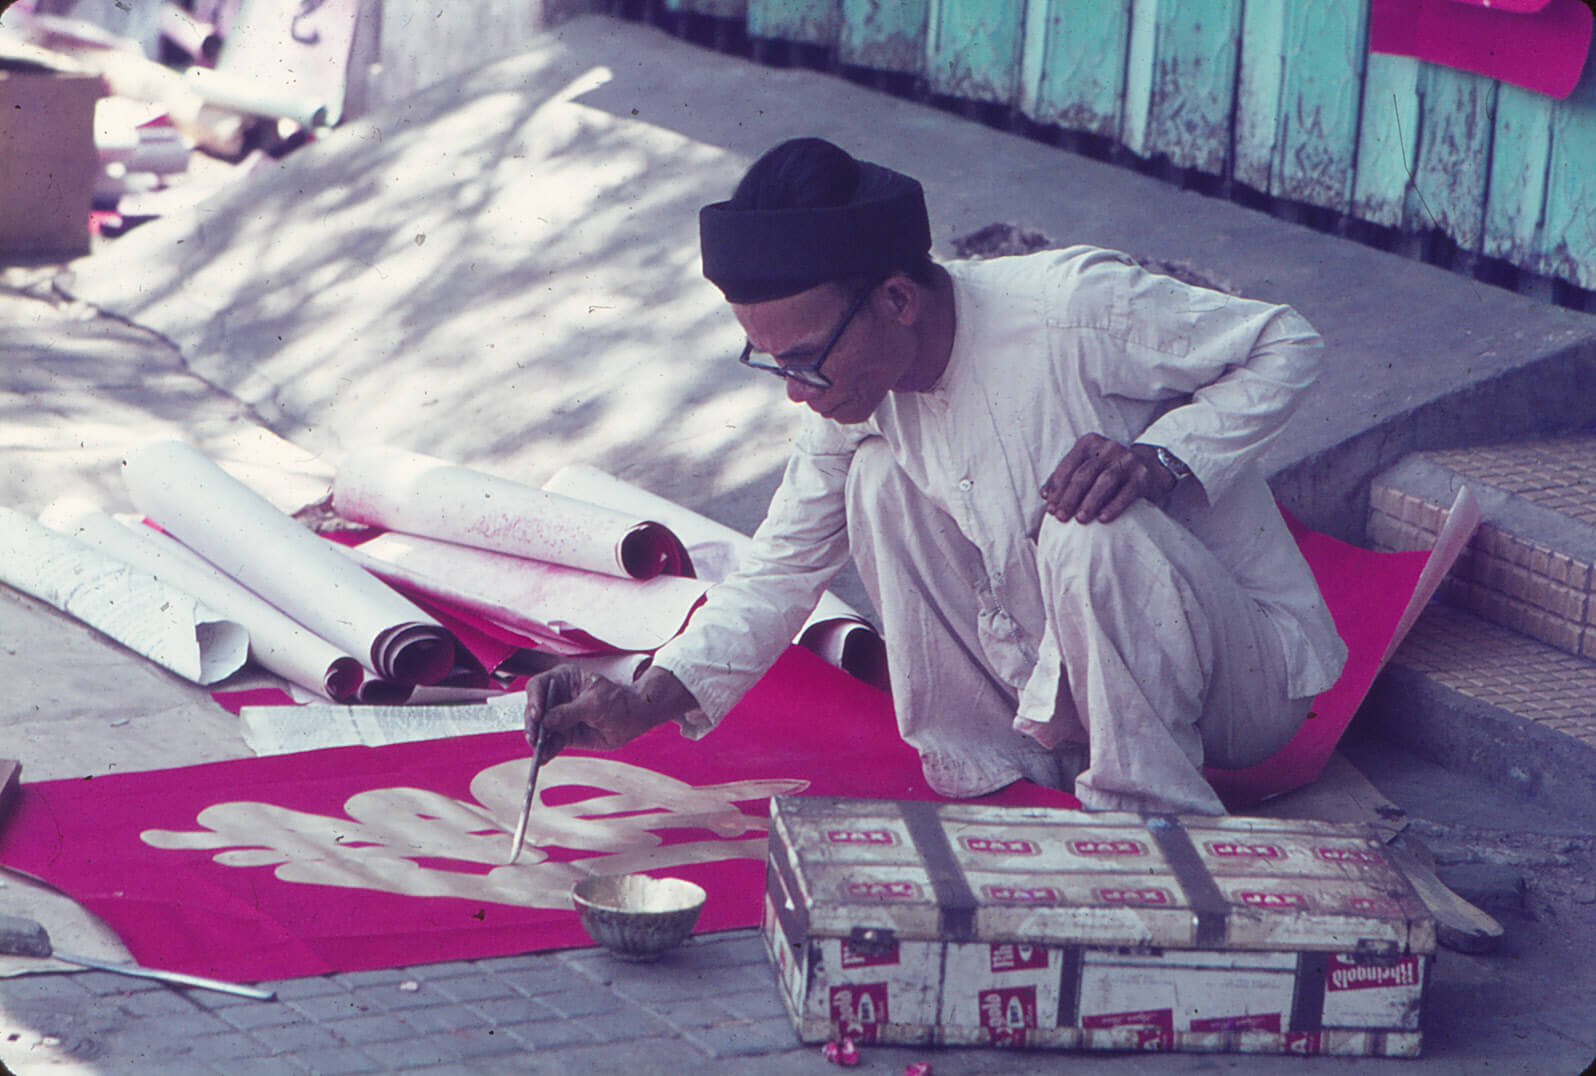 An older Vietnamese man in white clothing and a black hat, squatting down to paint a red sign with gold script.